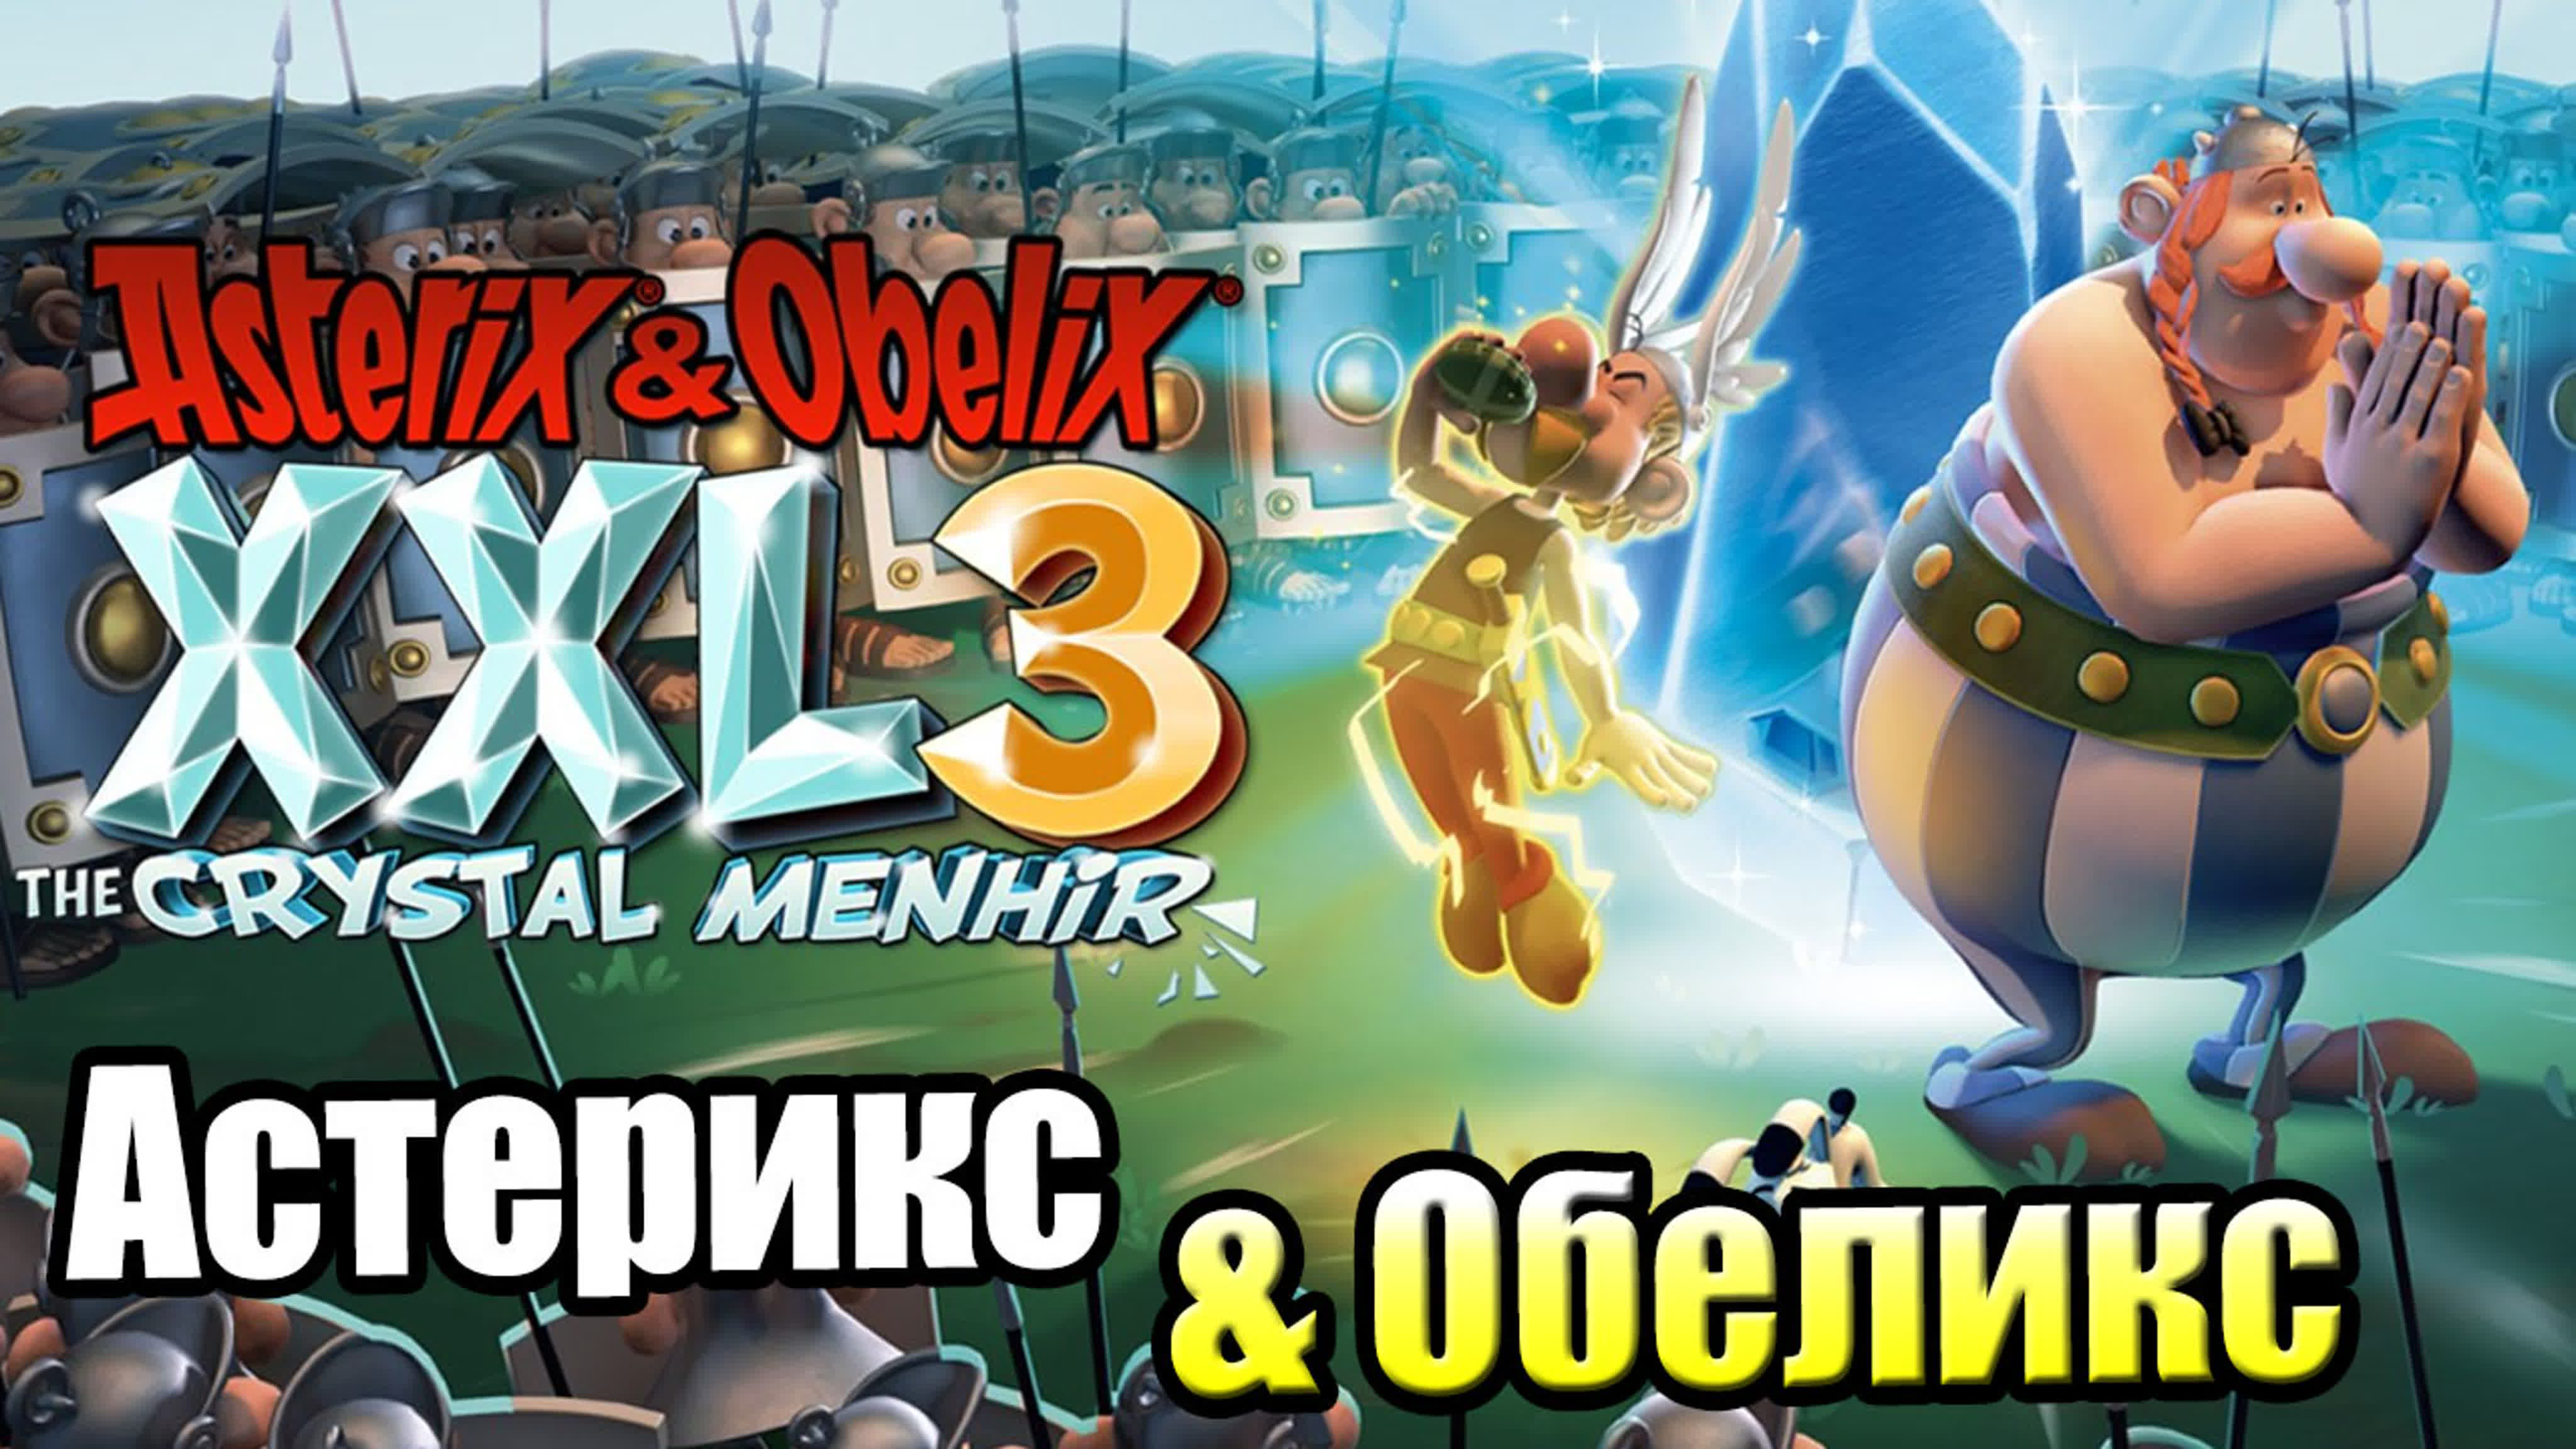 Asterix and Obelix XXL 3 The Crystal Menhir (PC)